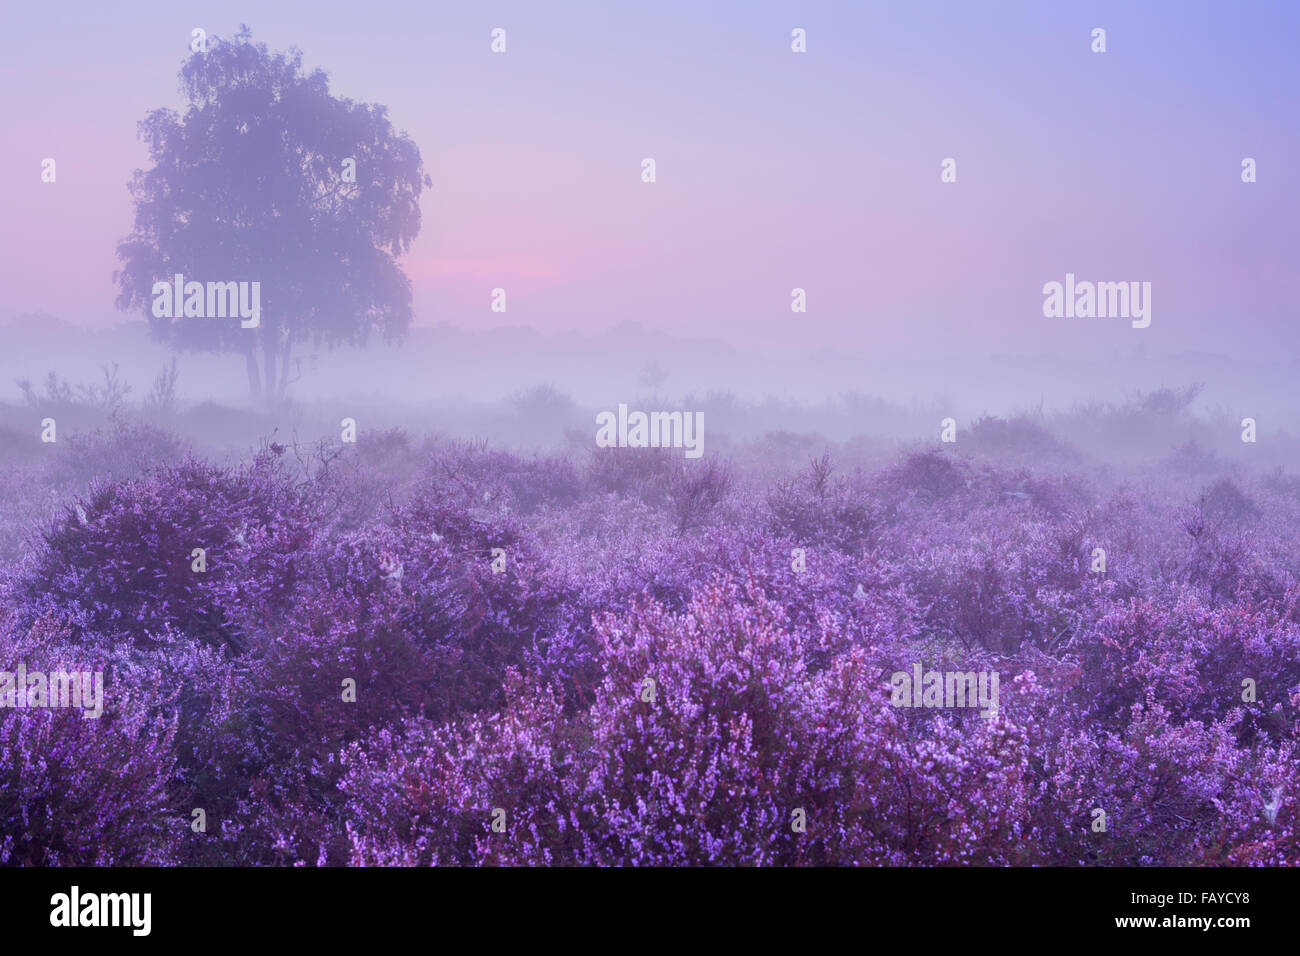 Blooming heather on a foggy morning at dawn. Photographed near Hilversum in The Netherlands. Stock Photo